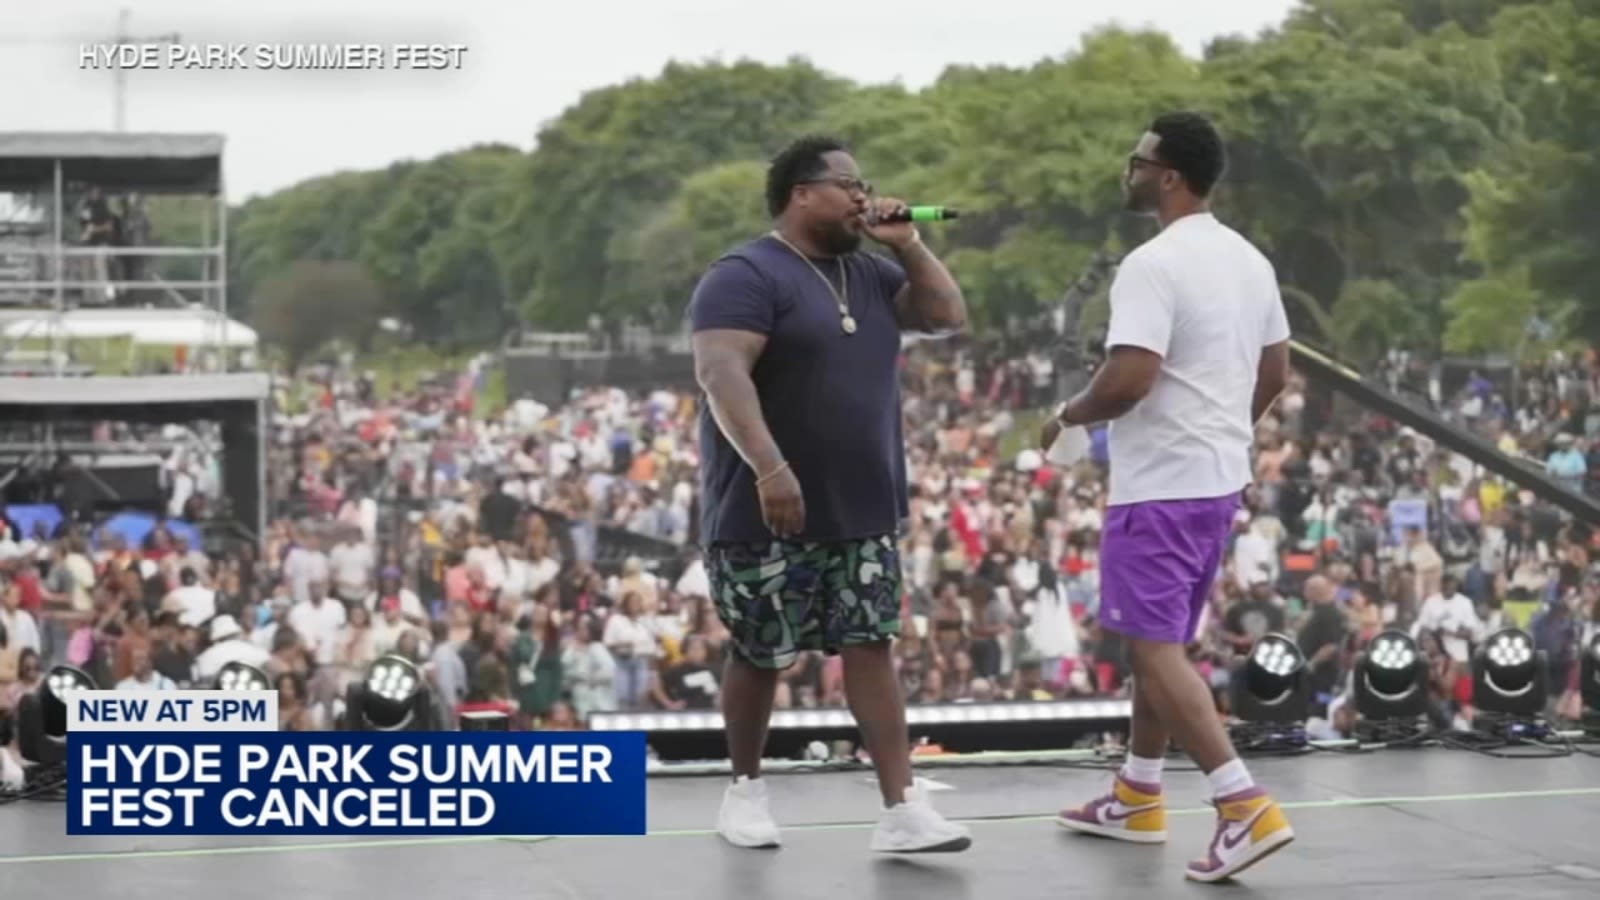 Hyde Park Summer Fest canceled due to rising security costs